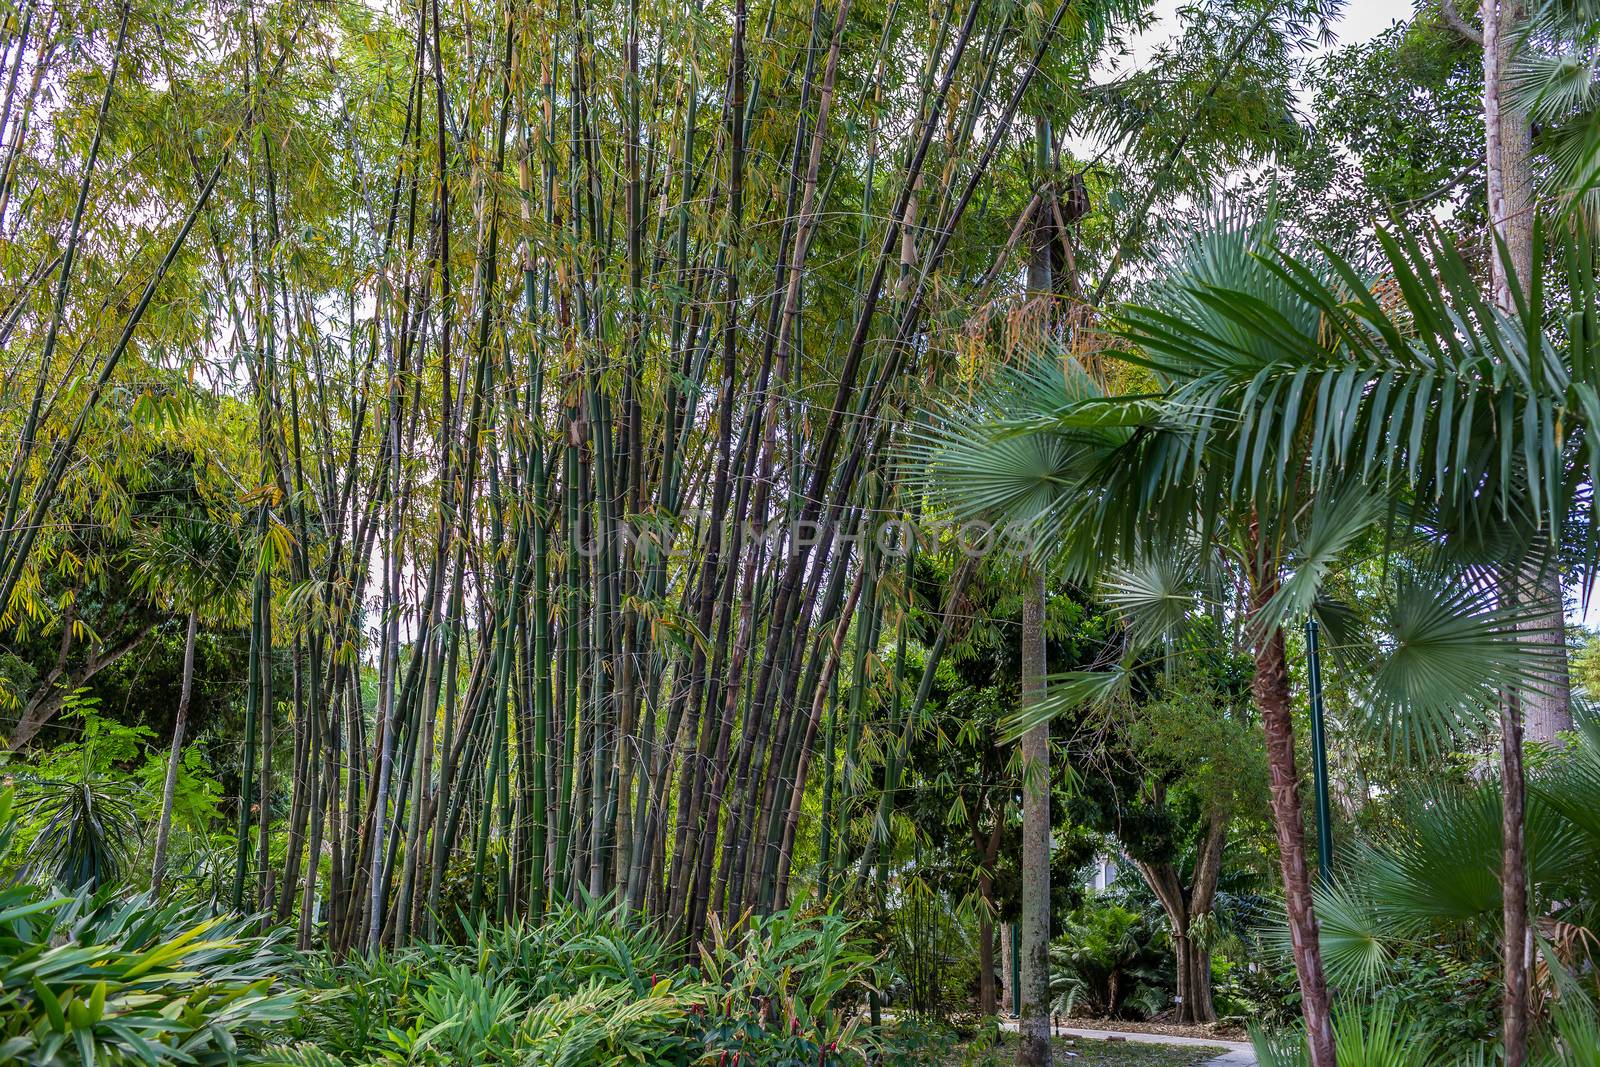 South Florida Bamboo by adifferentbrian